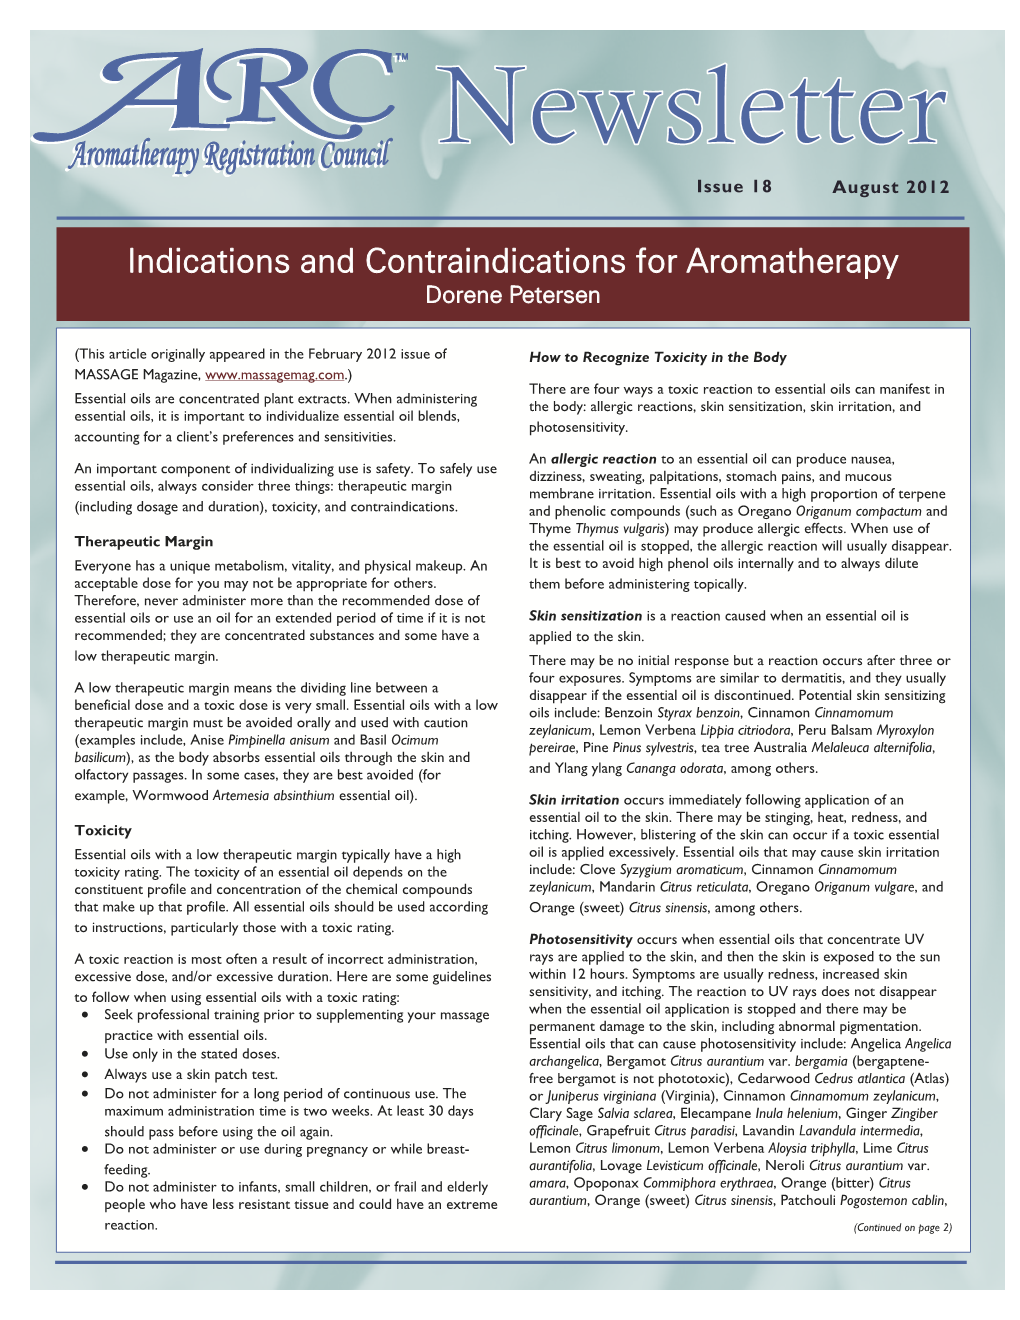 Indications and Contraindications for Aromatherapy Dorene Petersen